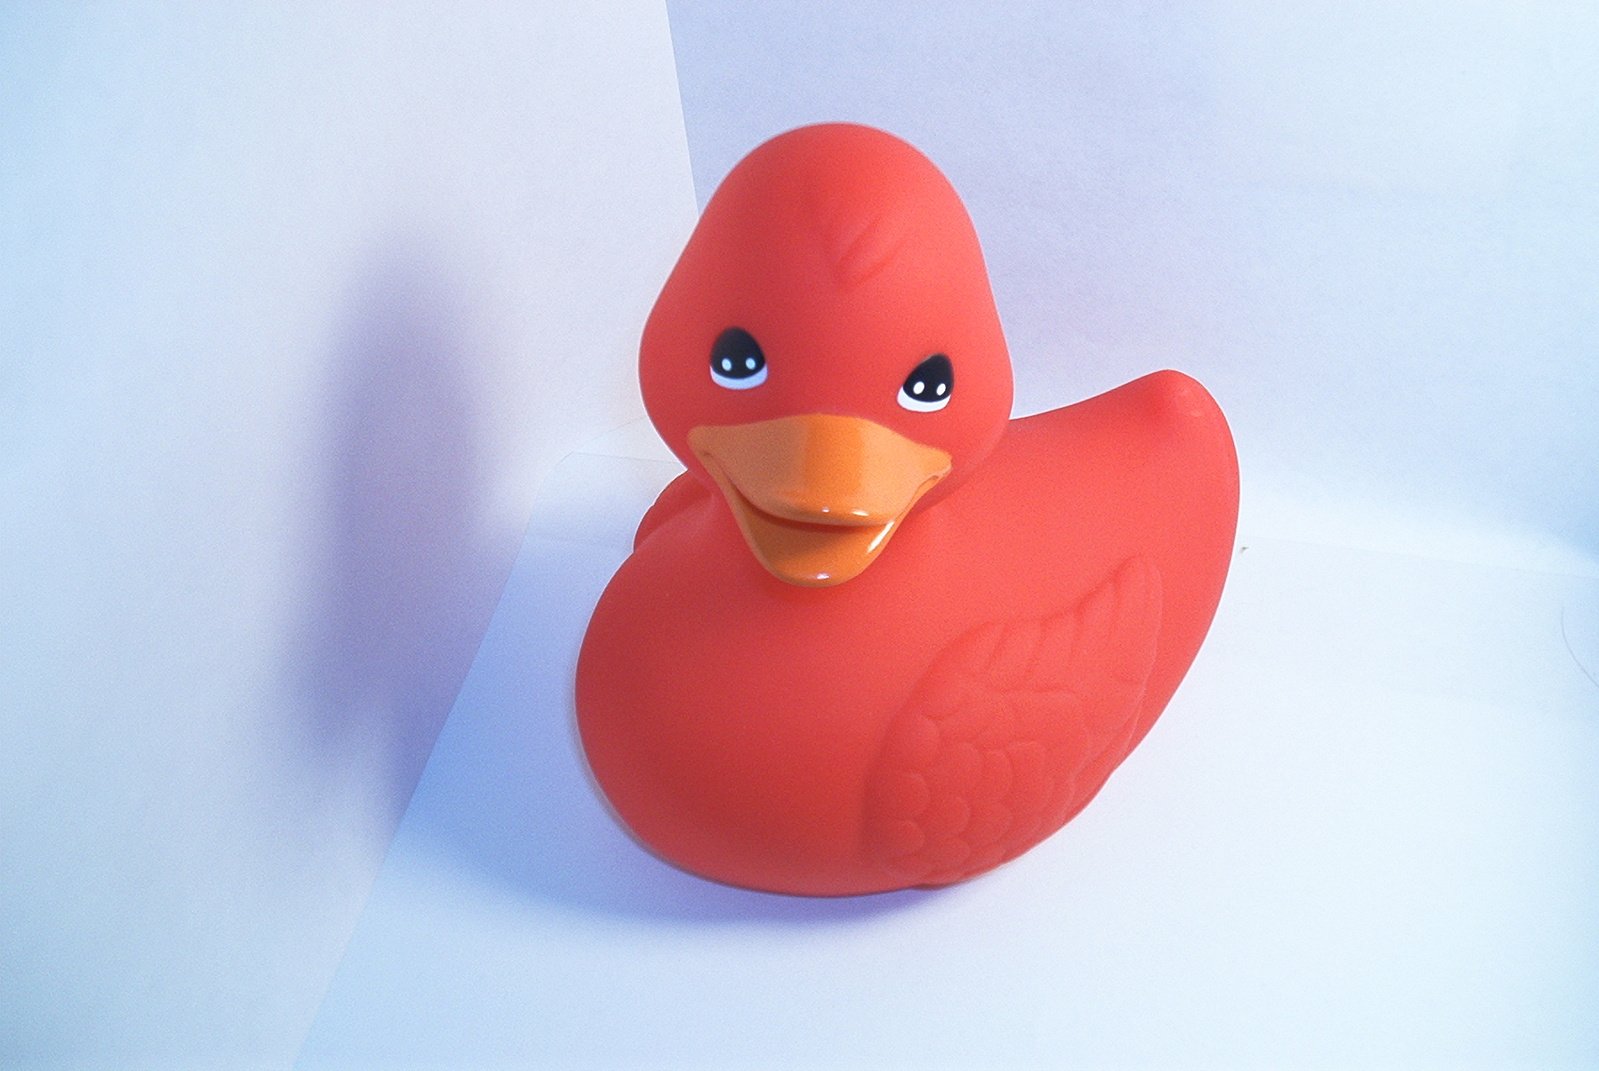 a small toy rubber duck sits on the paper